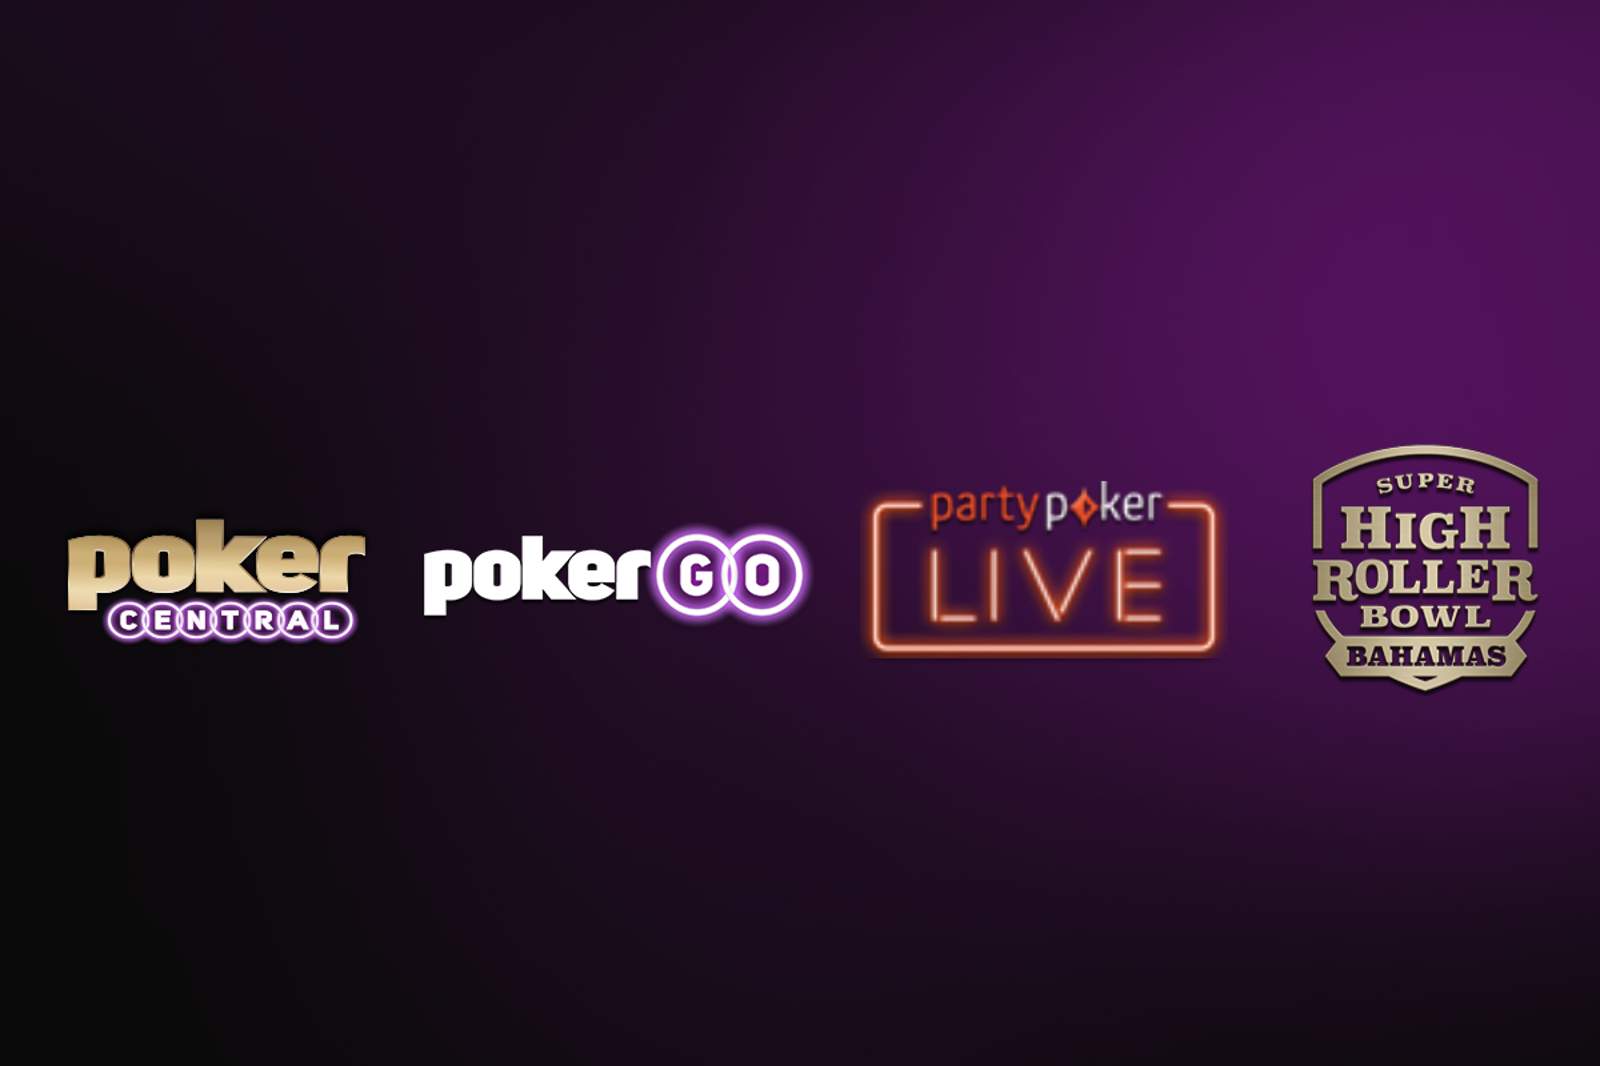 Poker Central and partypoker LIVE Ink Exclusive Rights Deal to Stream International partypoker MILLIONS Tour